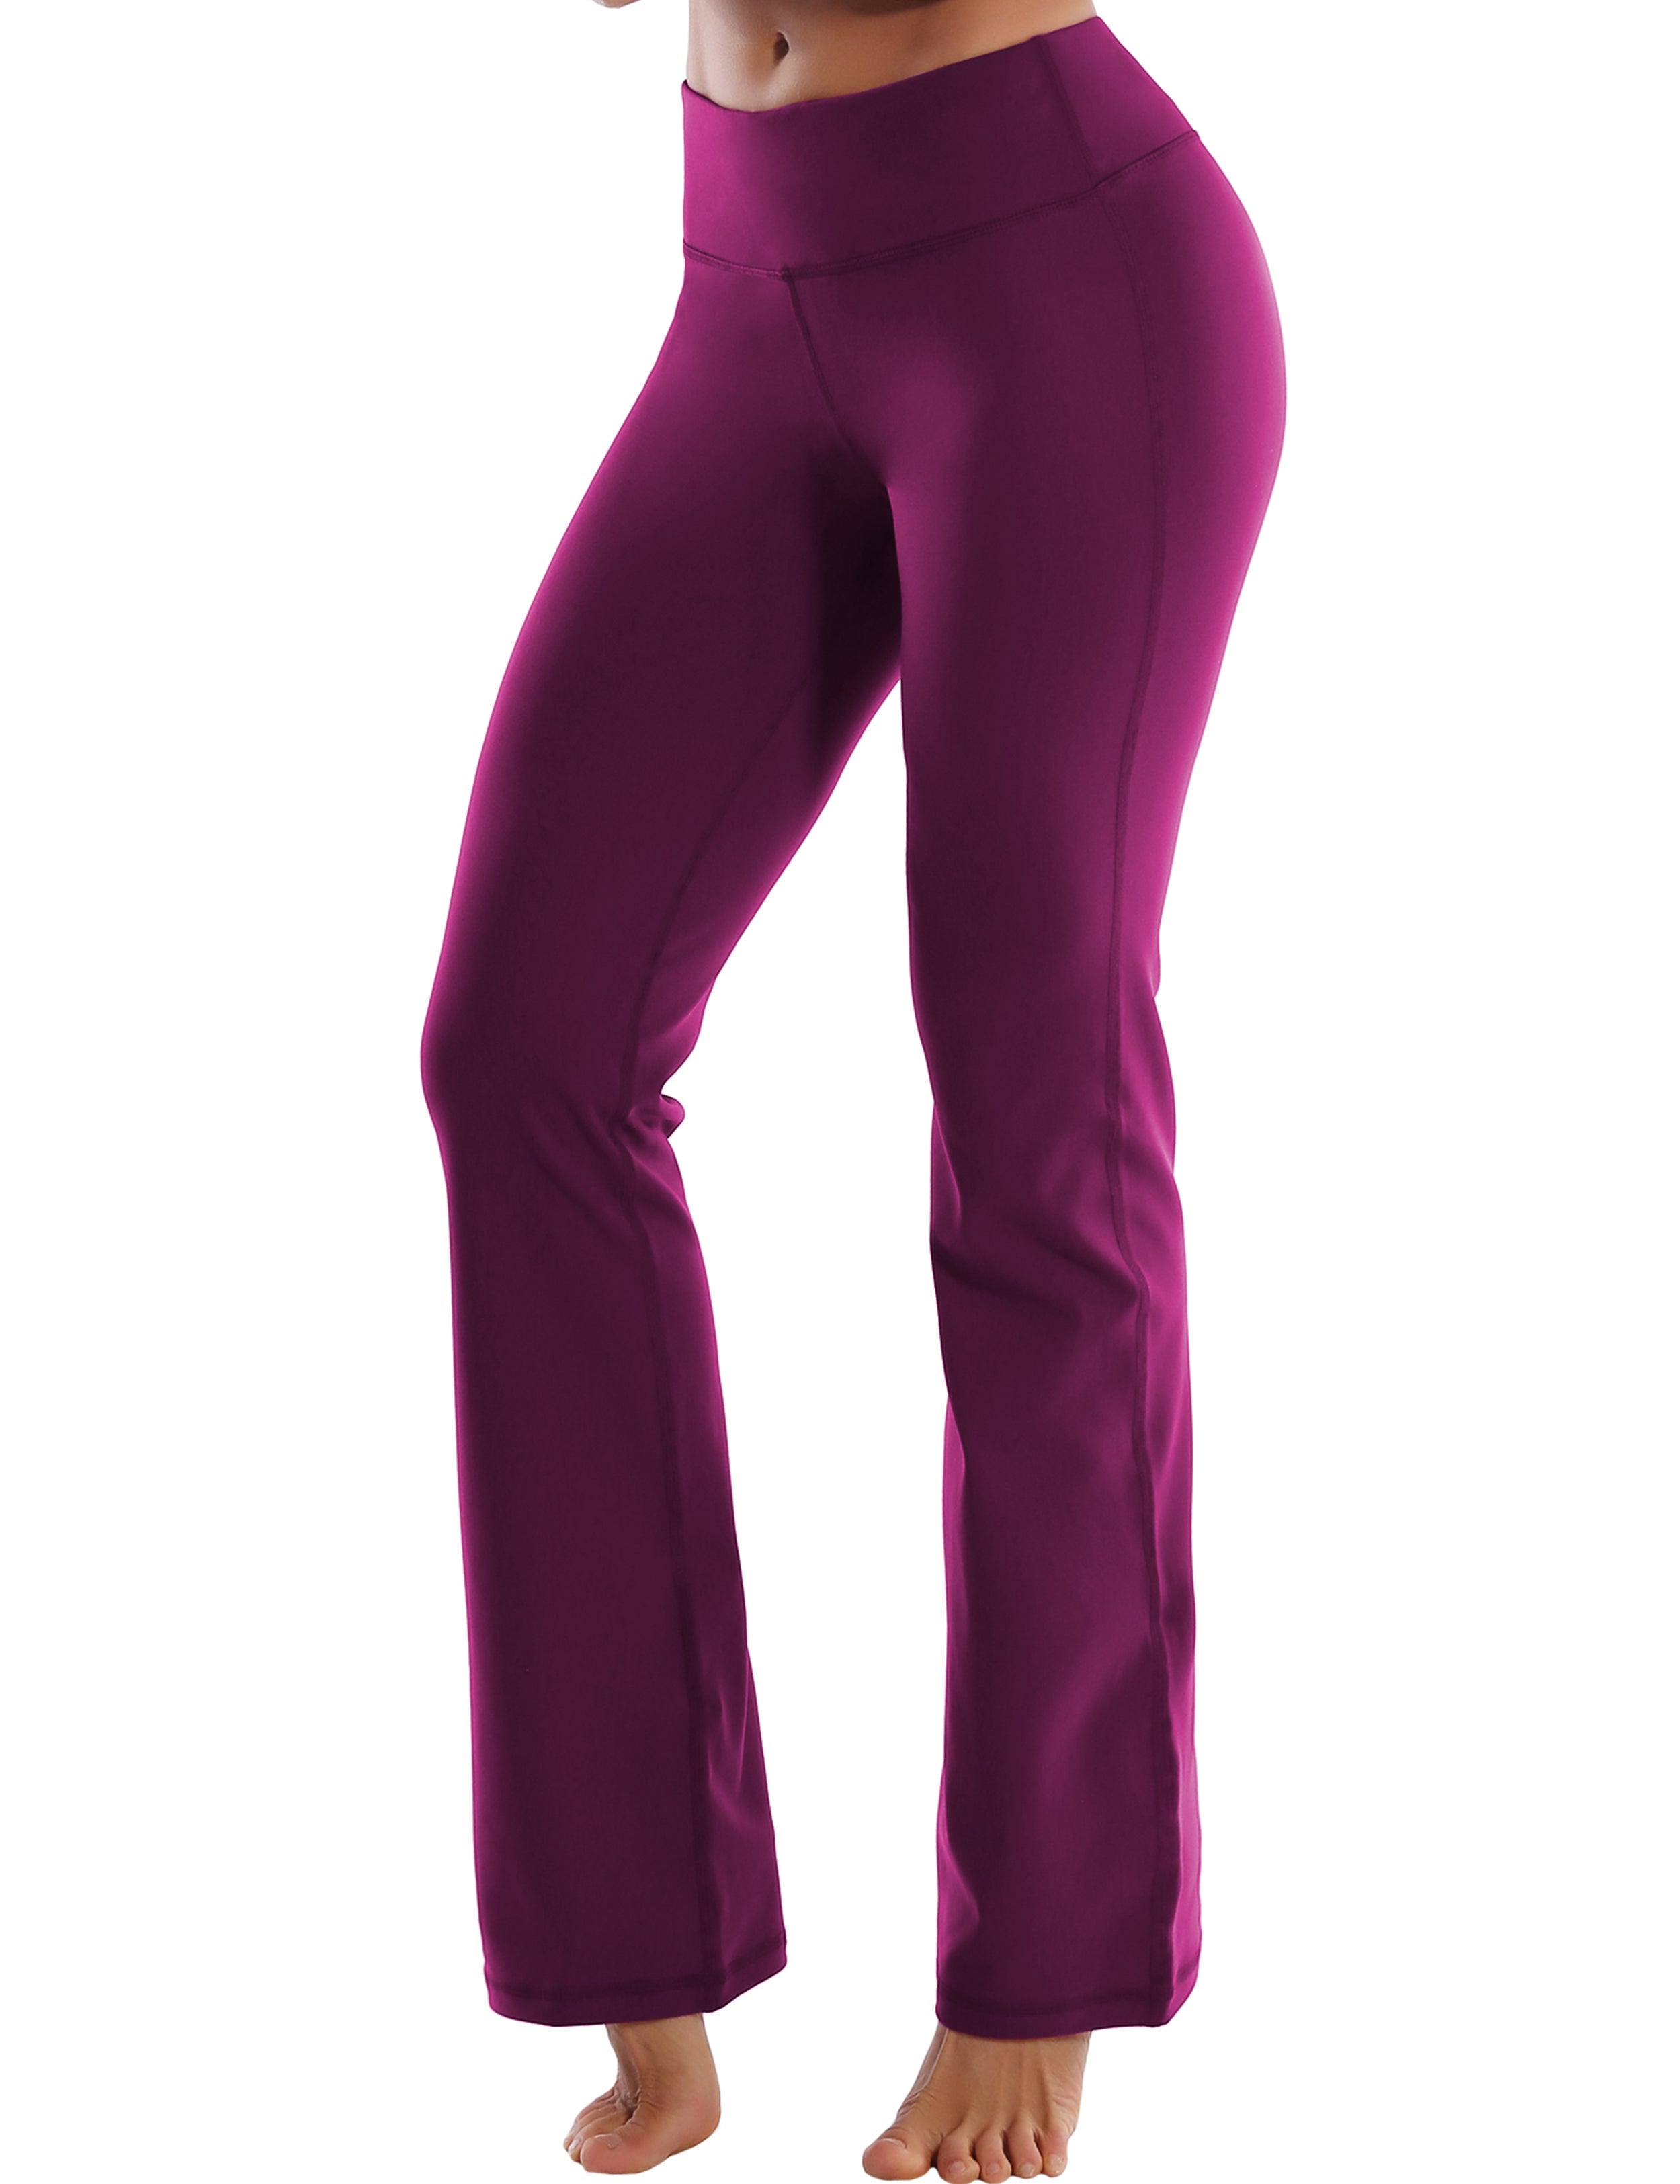 Cotton Nylon Bootcut Leggings plum 87%Nylon/13%Spandex (Super soft, cotton feel , 280gsm) Fabric doesn't attract lint easily 4-way stretch No see-through Moisture-wicking Inner pocket Four lengths